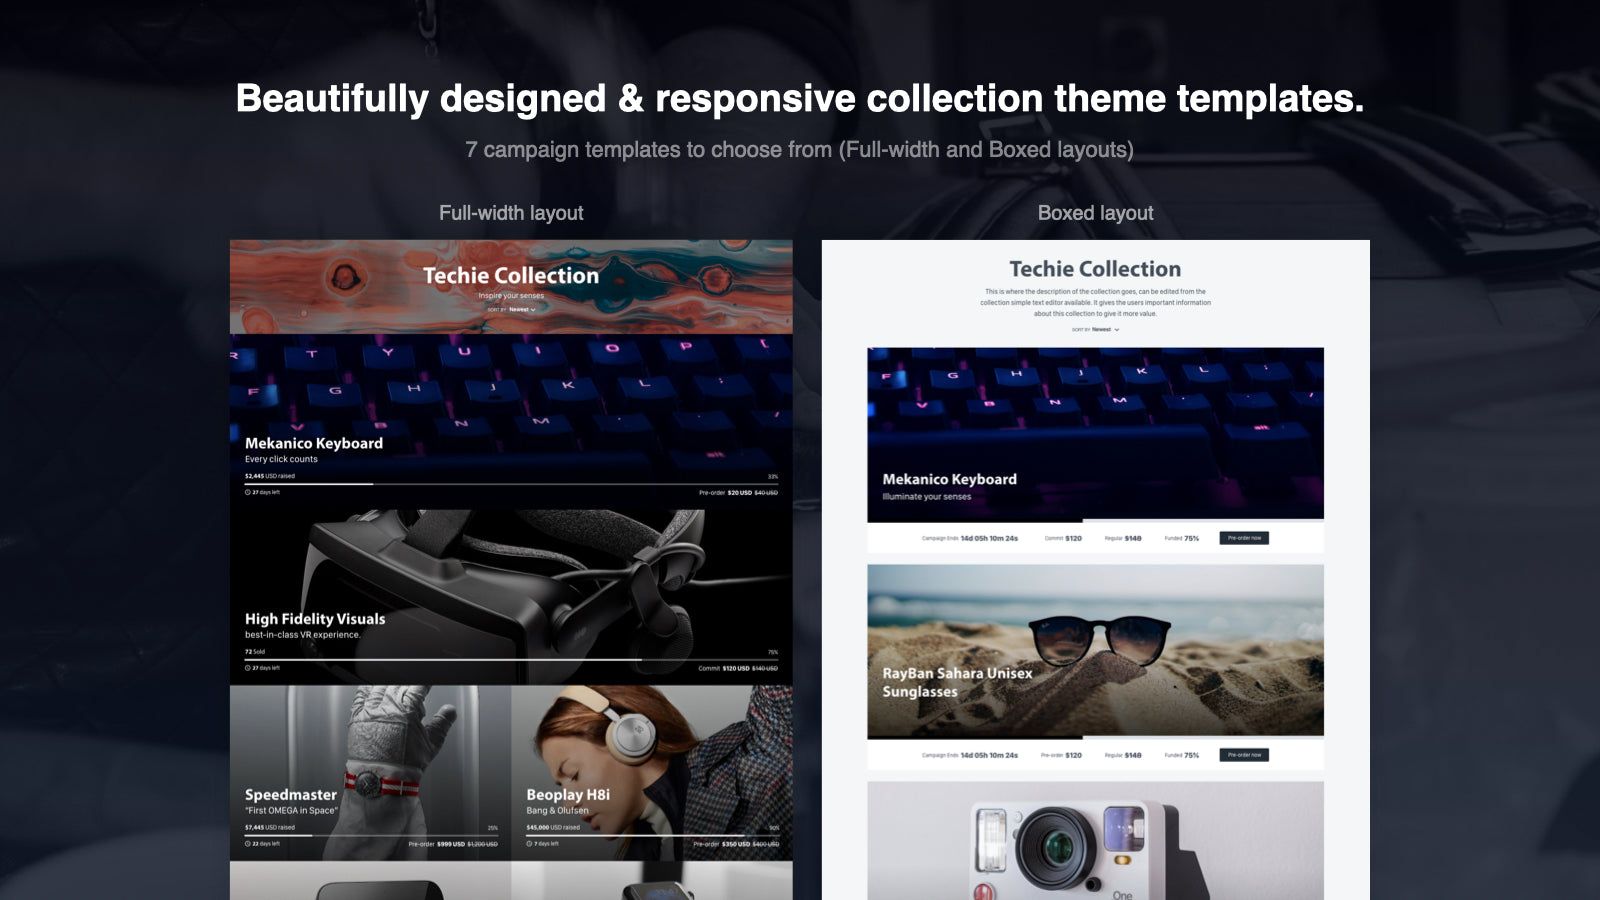 Beautifully designed & responsive collection theme templates.